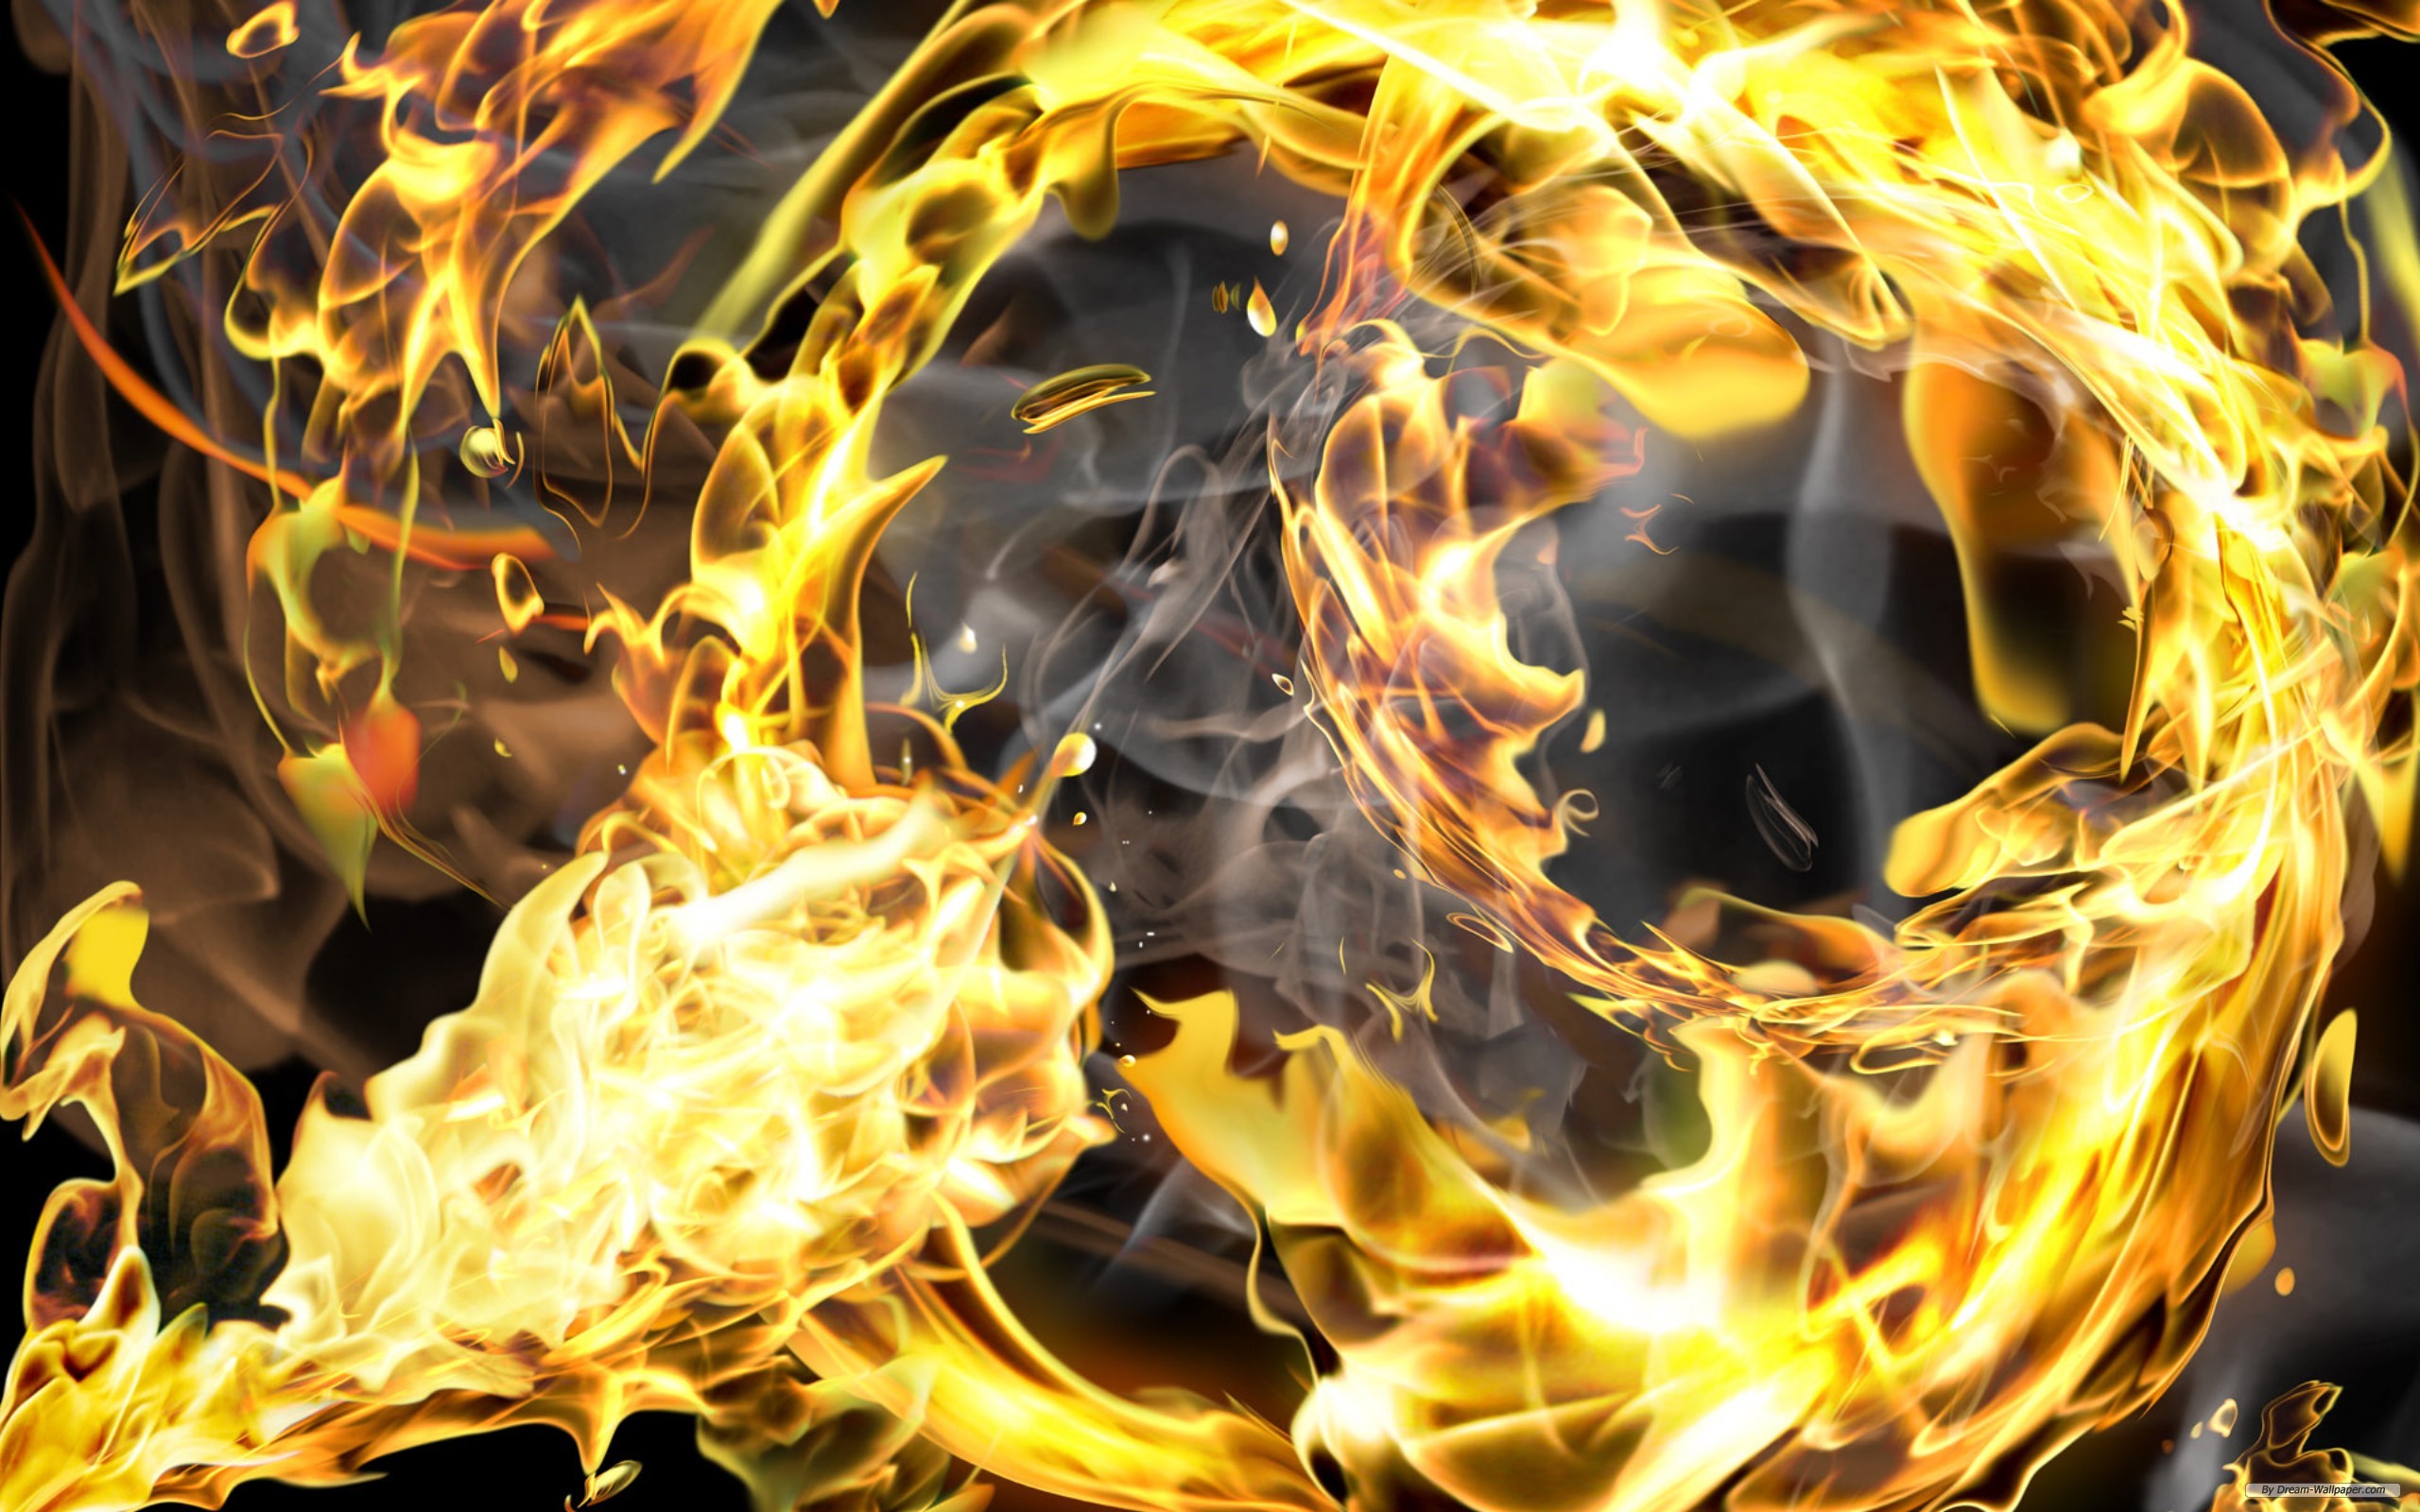 Artistic Fire HD Wallpaper | Background Image